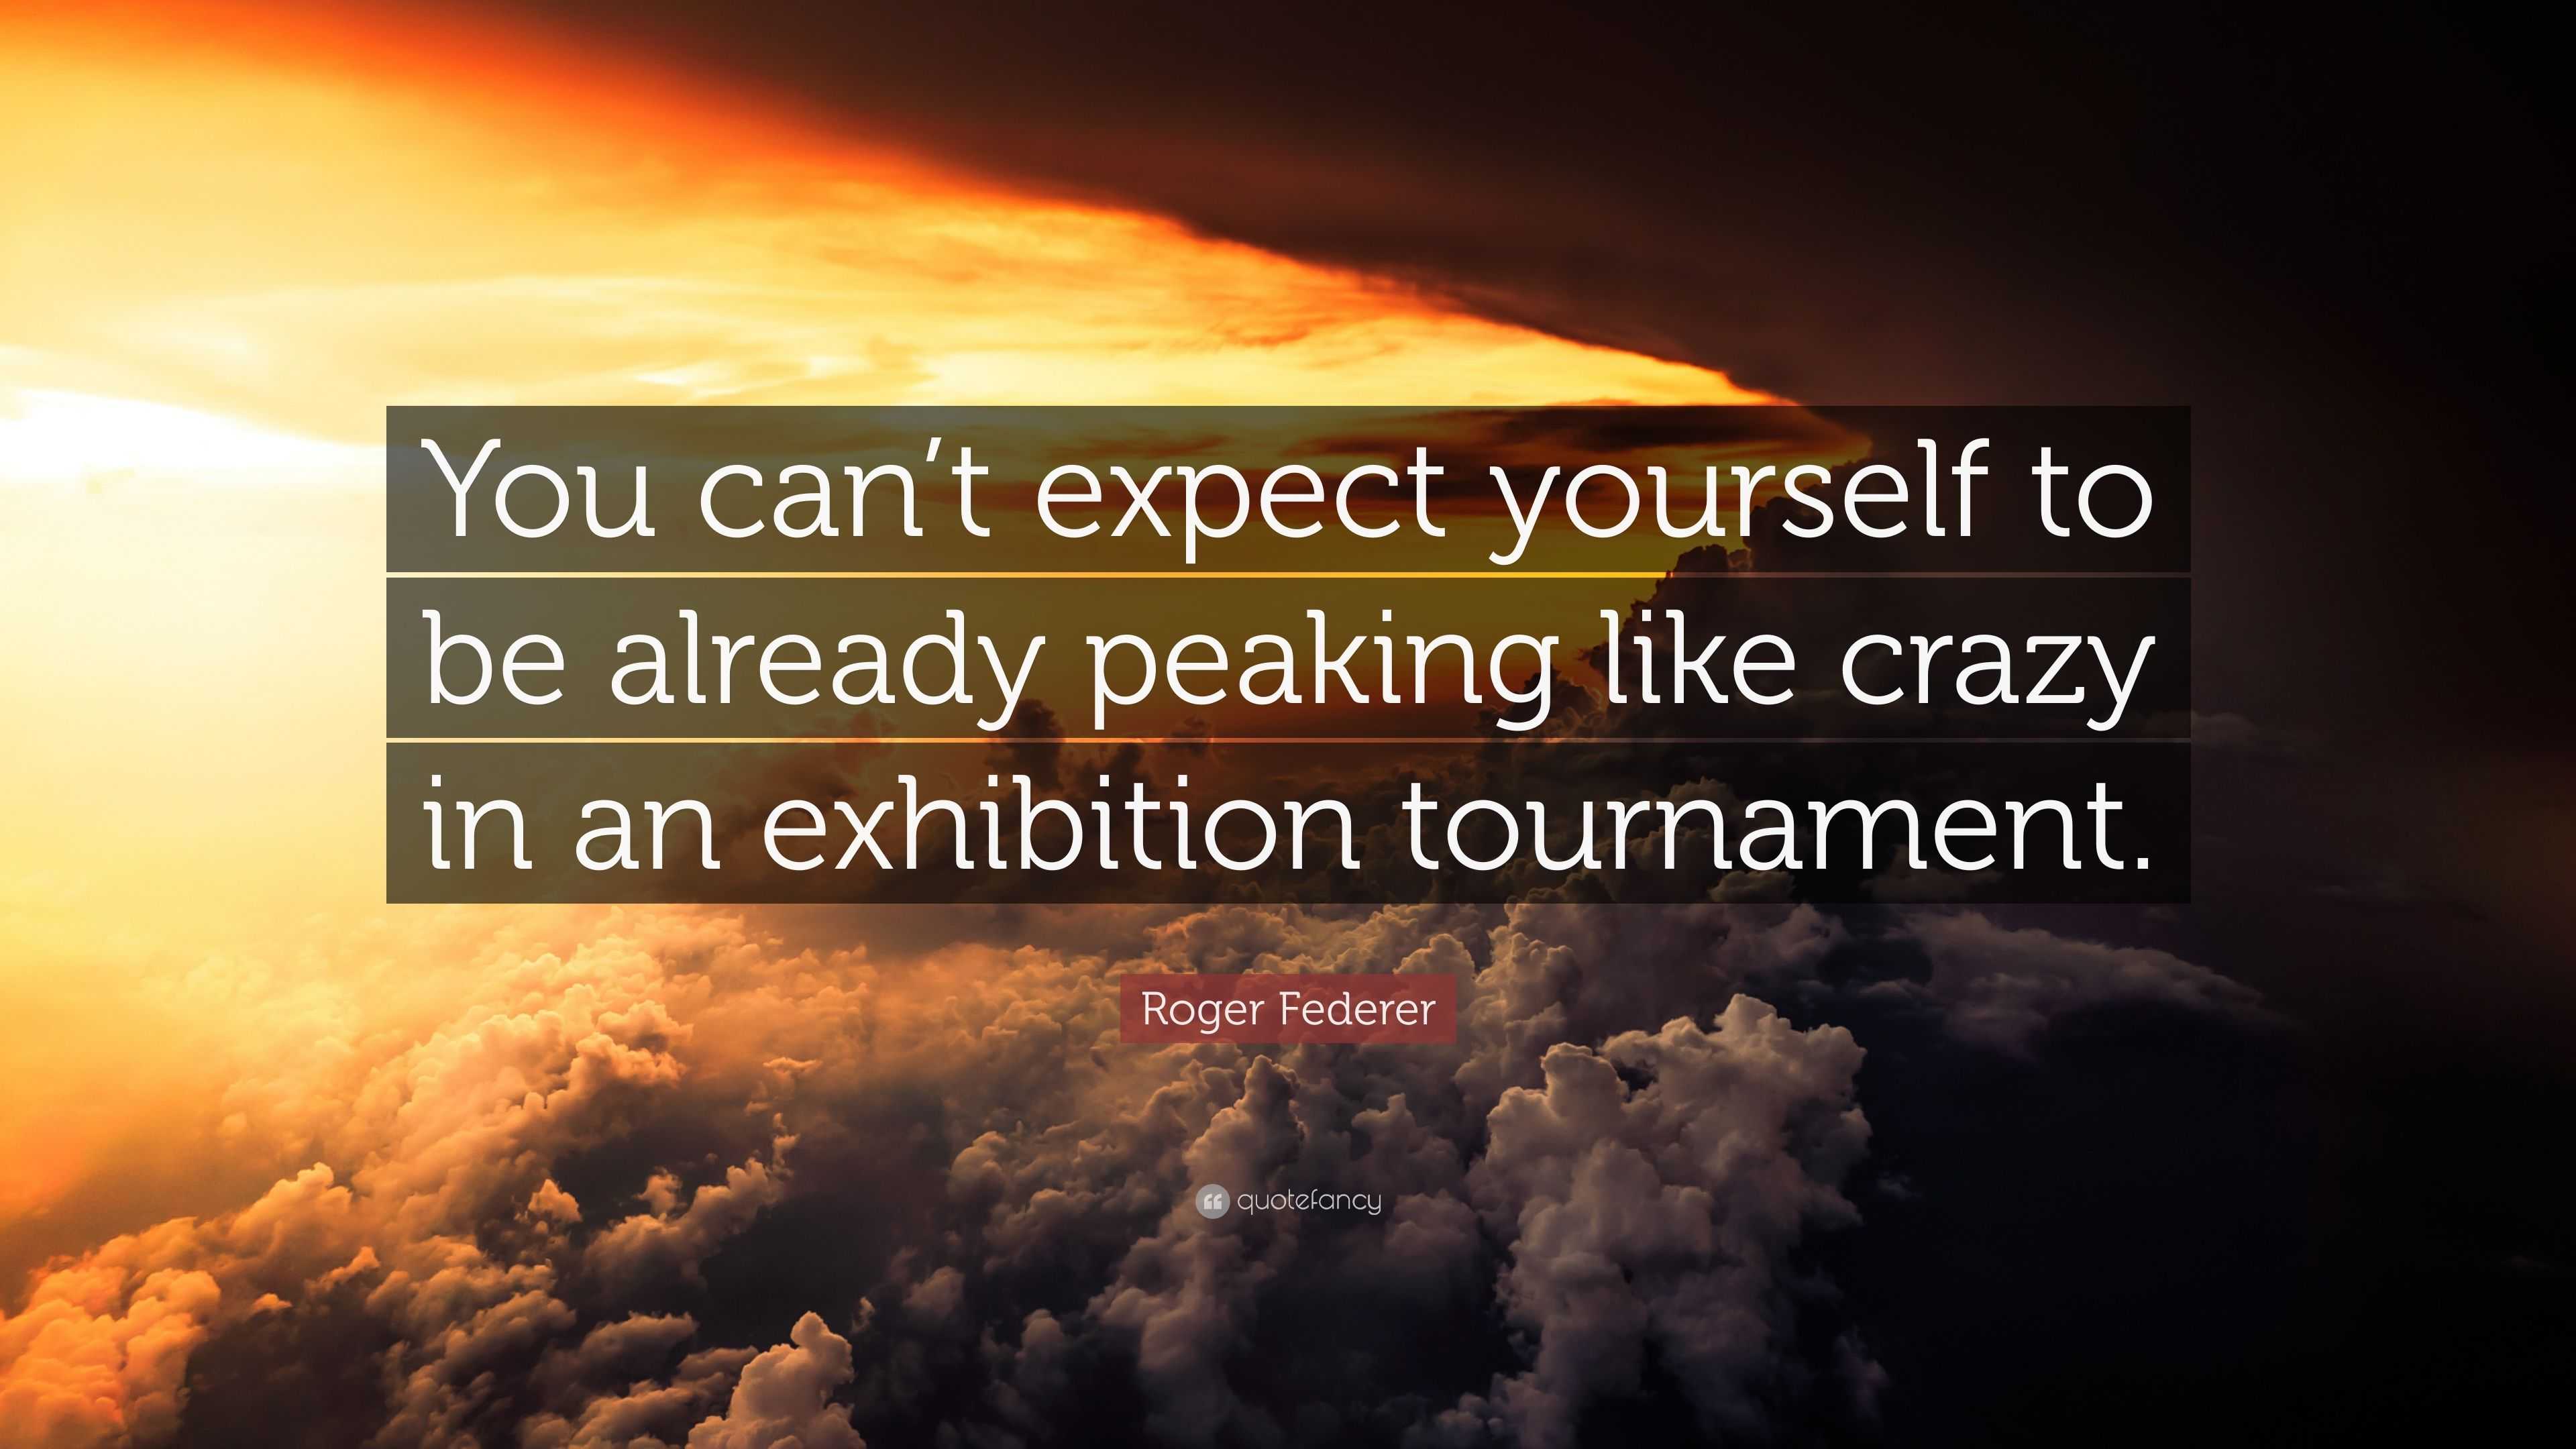 Roger Federer Quote: "You can't expect yourself to be ...